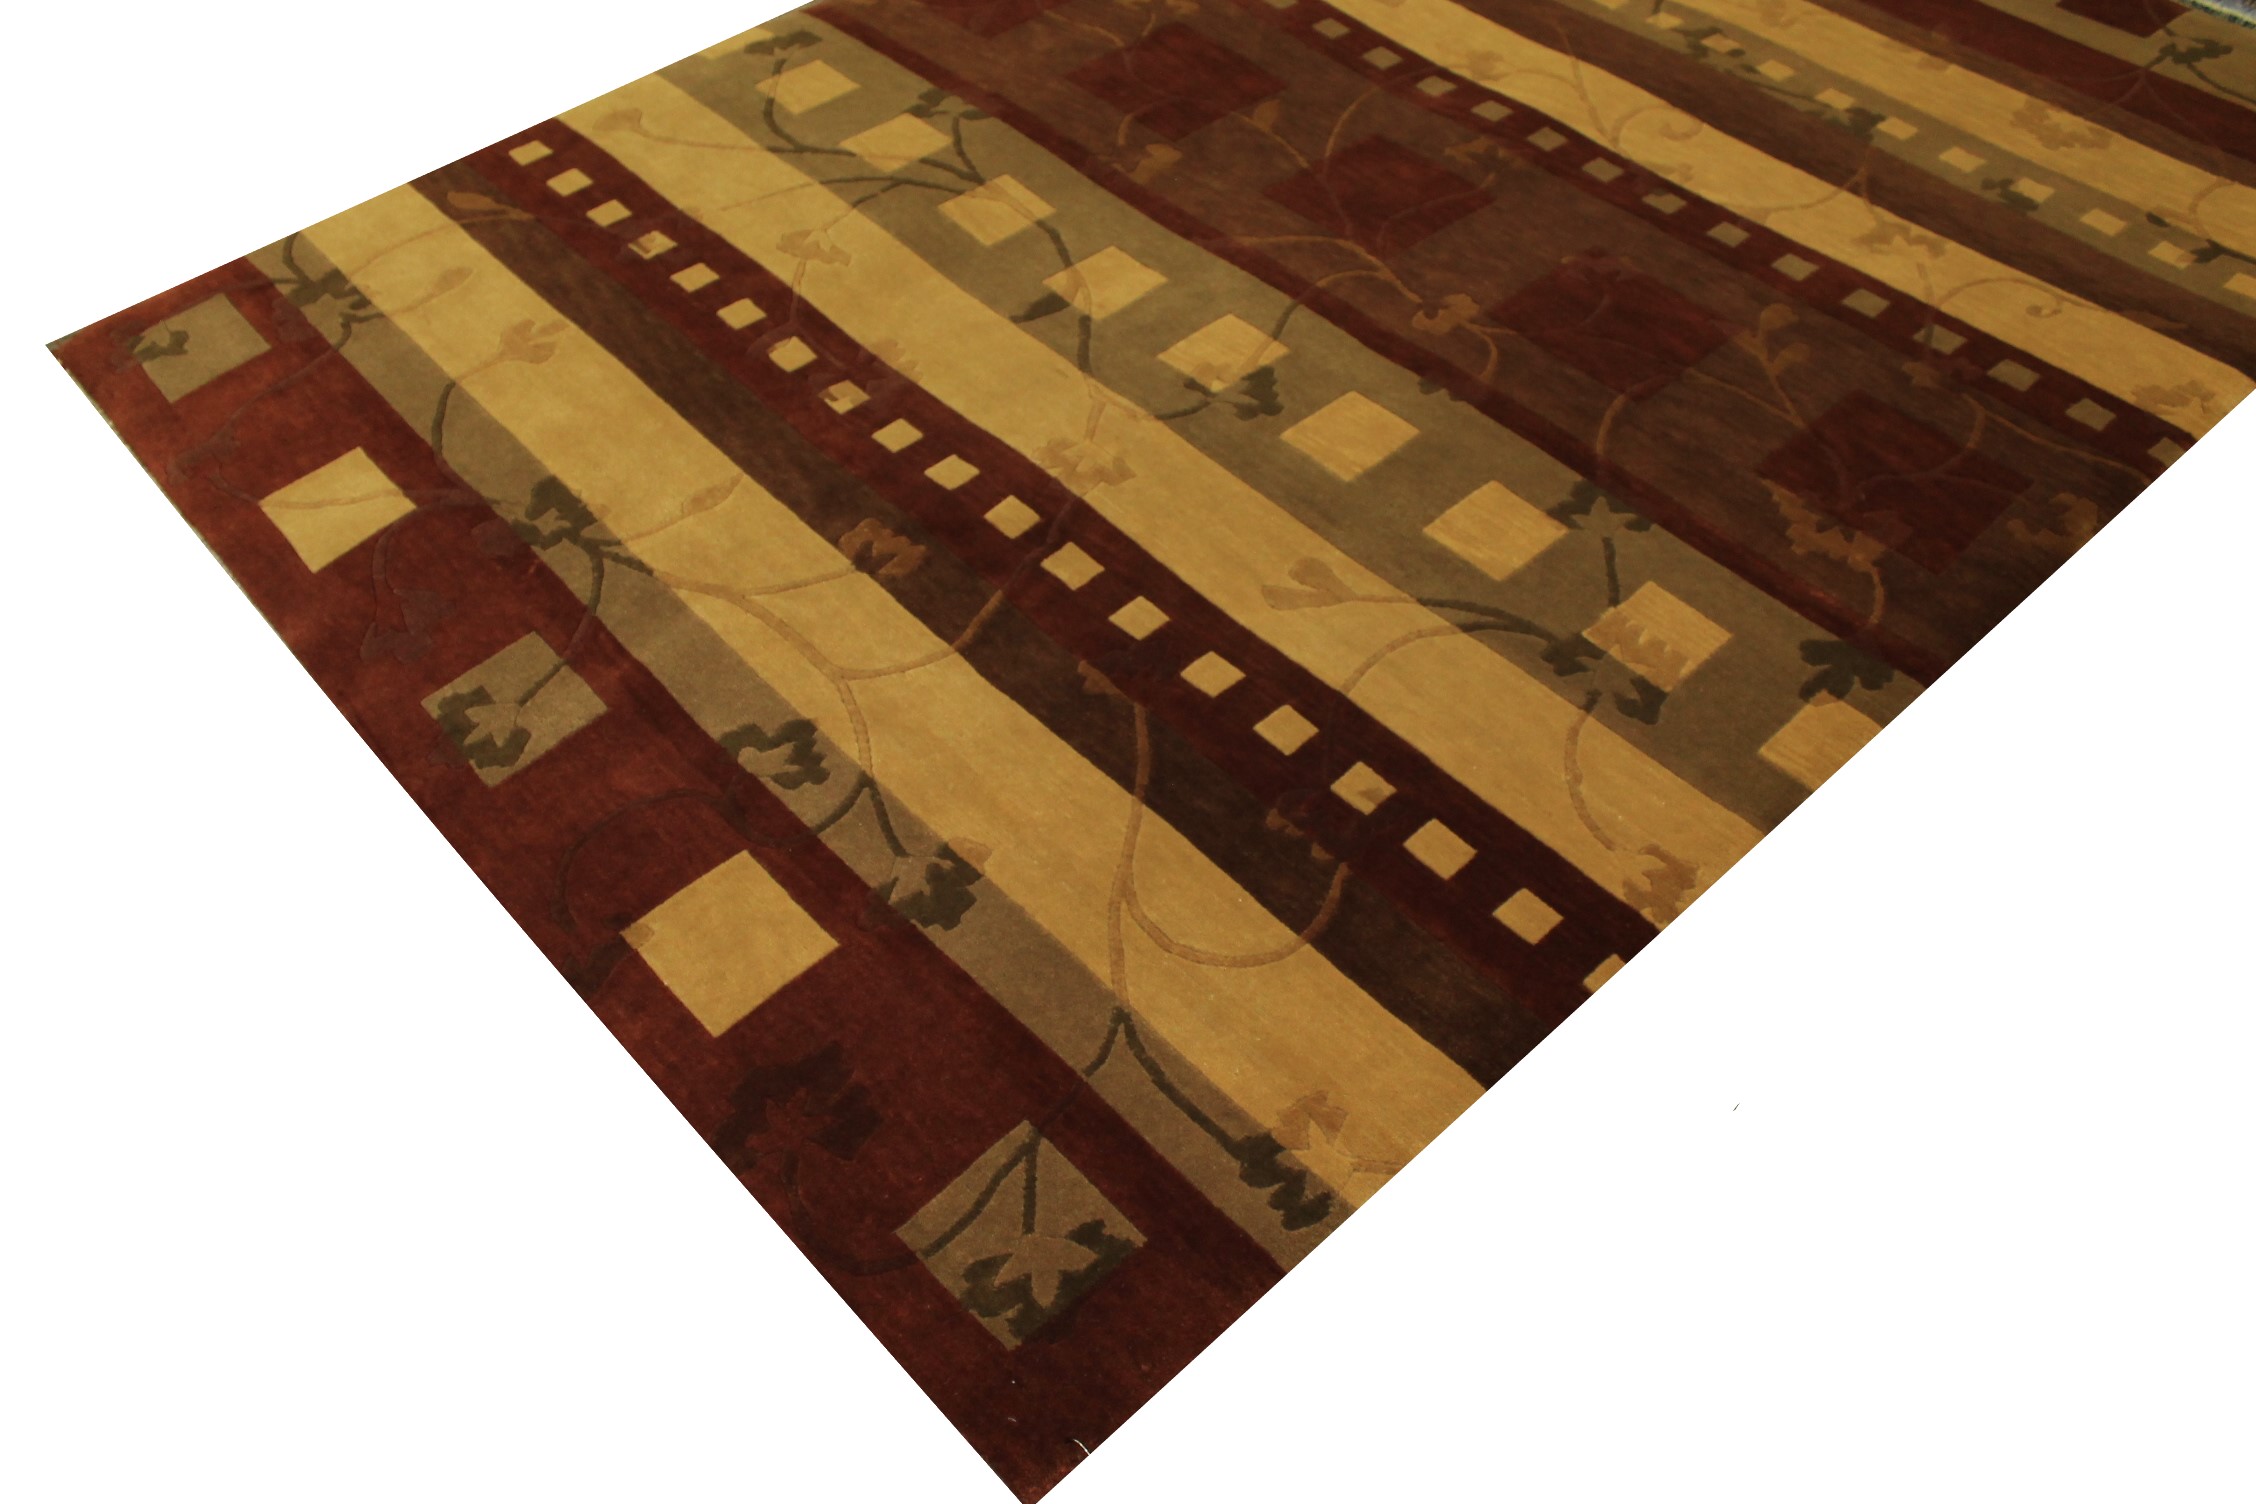 Clearance & Discount Rugs Tibet Style Hand Knotted Rug 8451 Lt. Brown - Chocolate & Multi Hand Knotted Rug